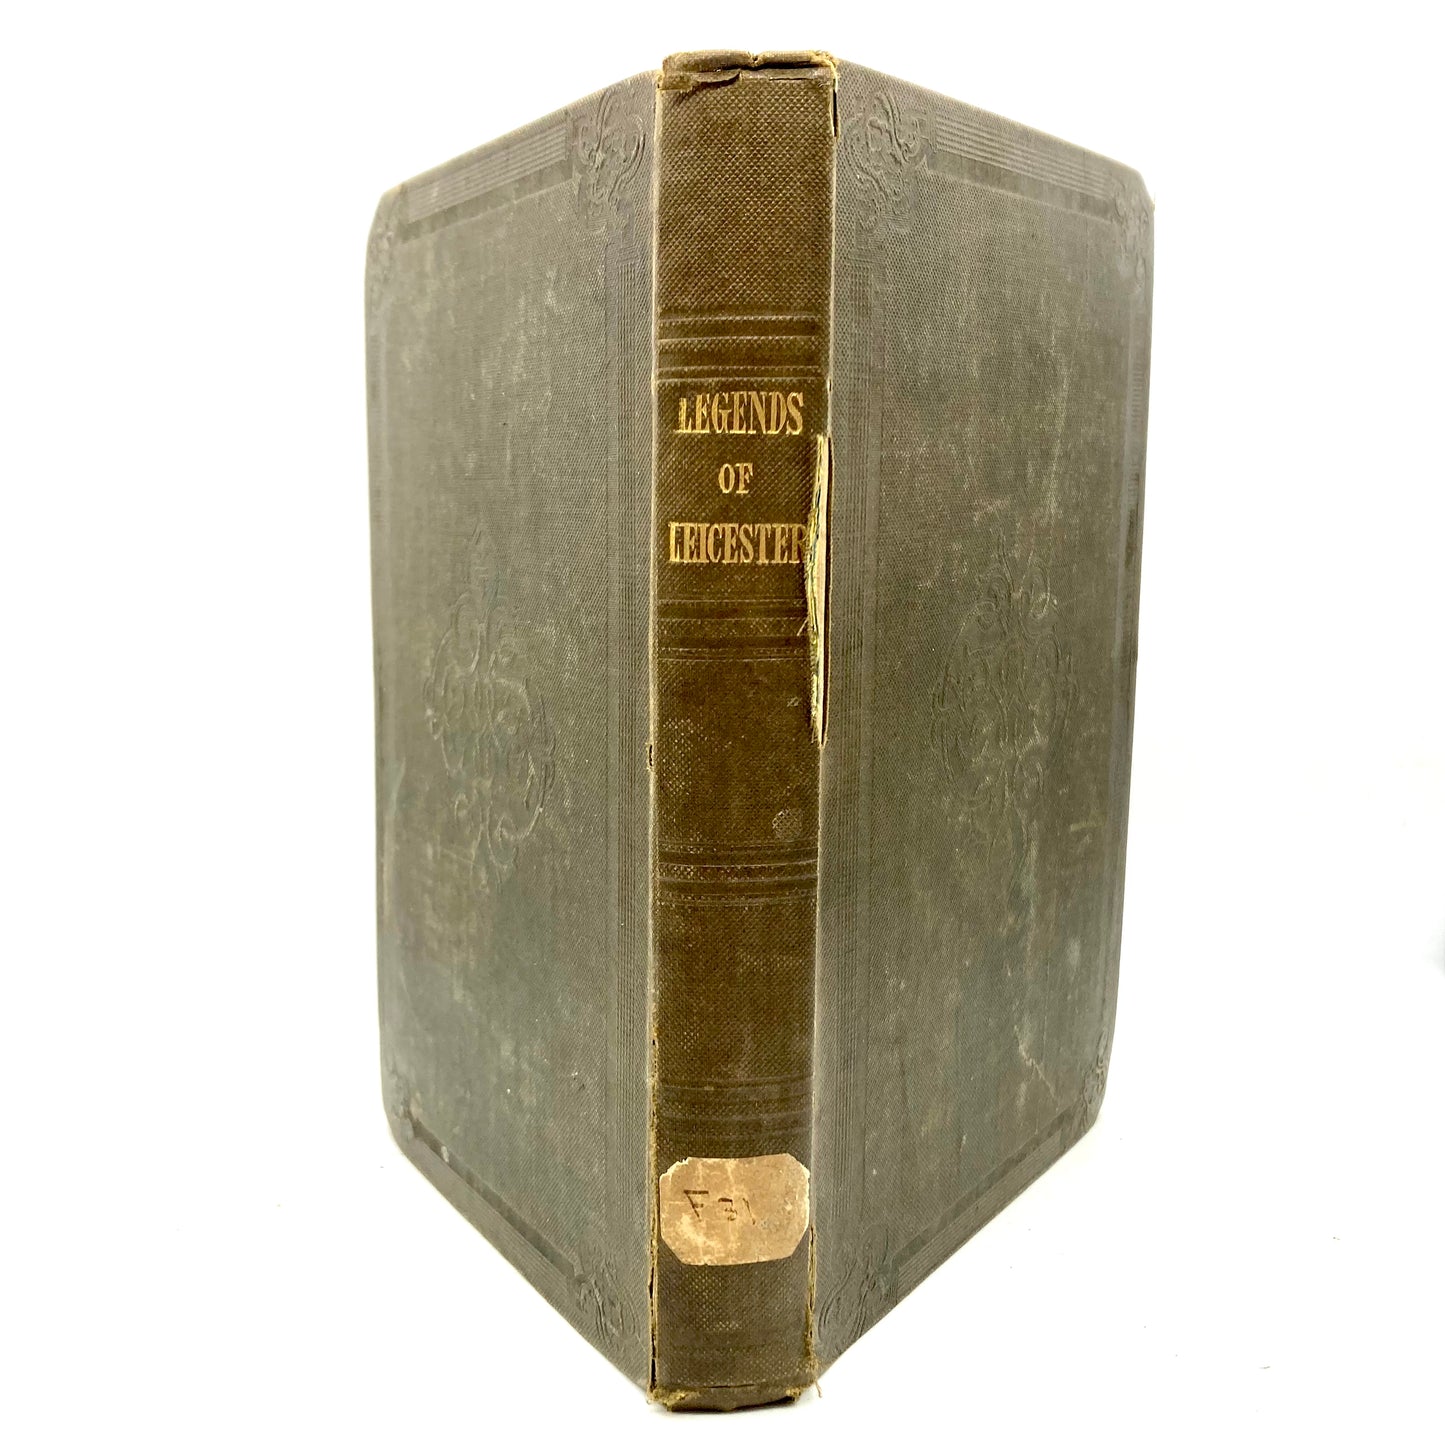 FEATHERSTONE, Thomas "Legends of Leicester" [Whittaker & co, 1838] - Buzz Bookstore